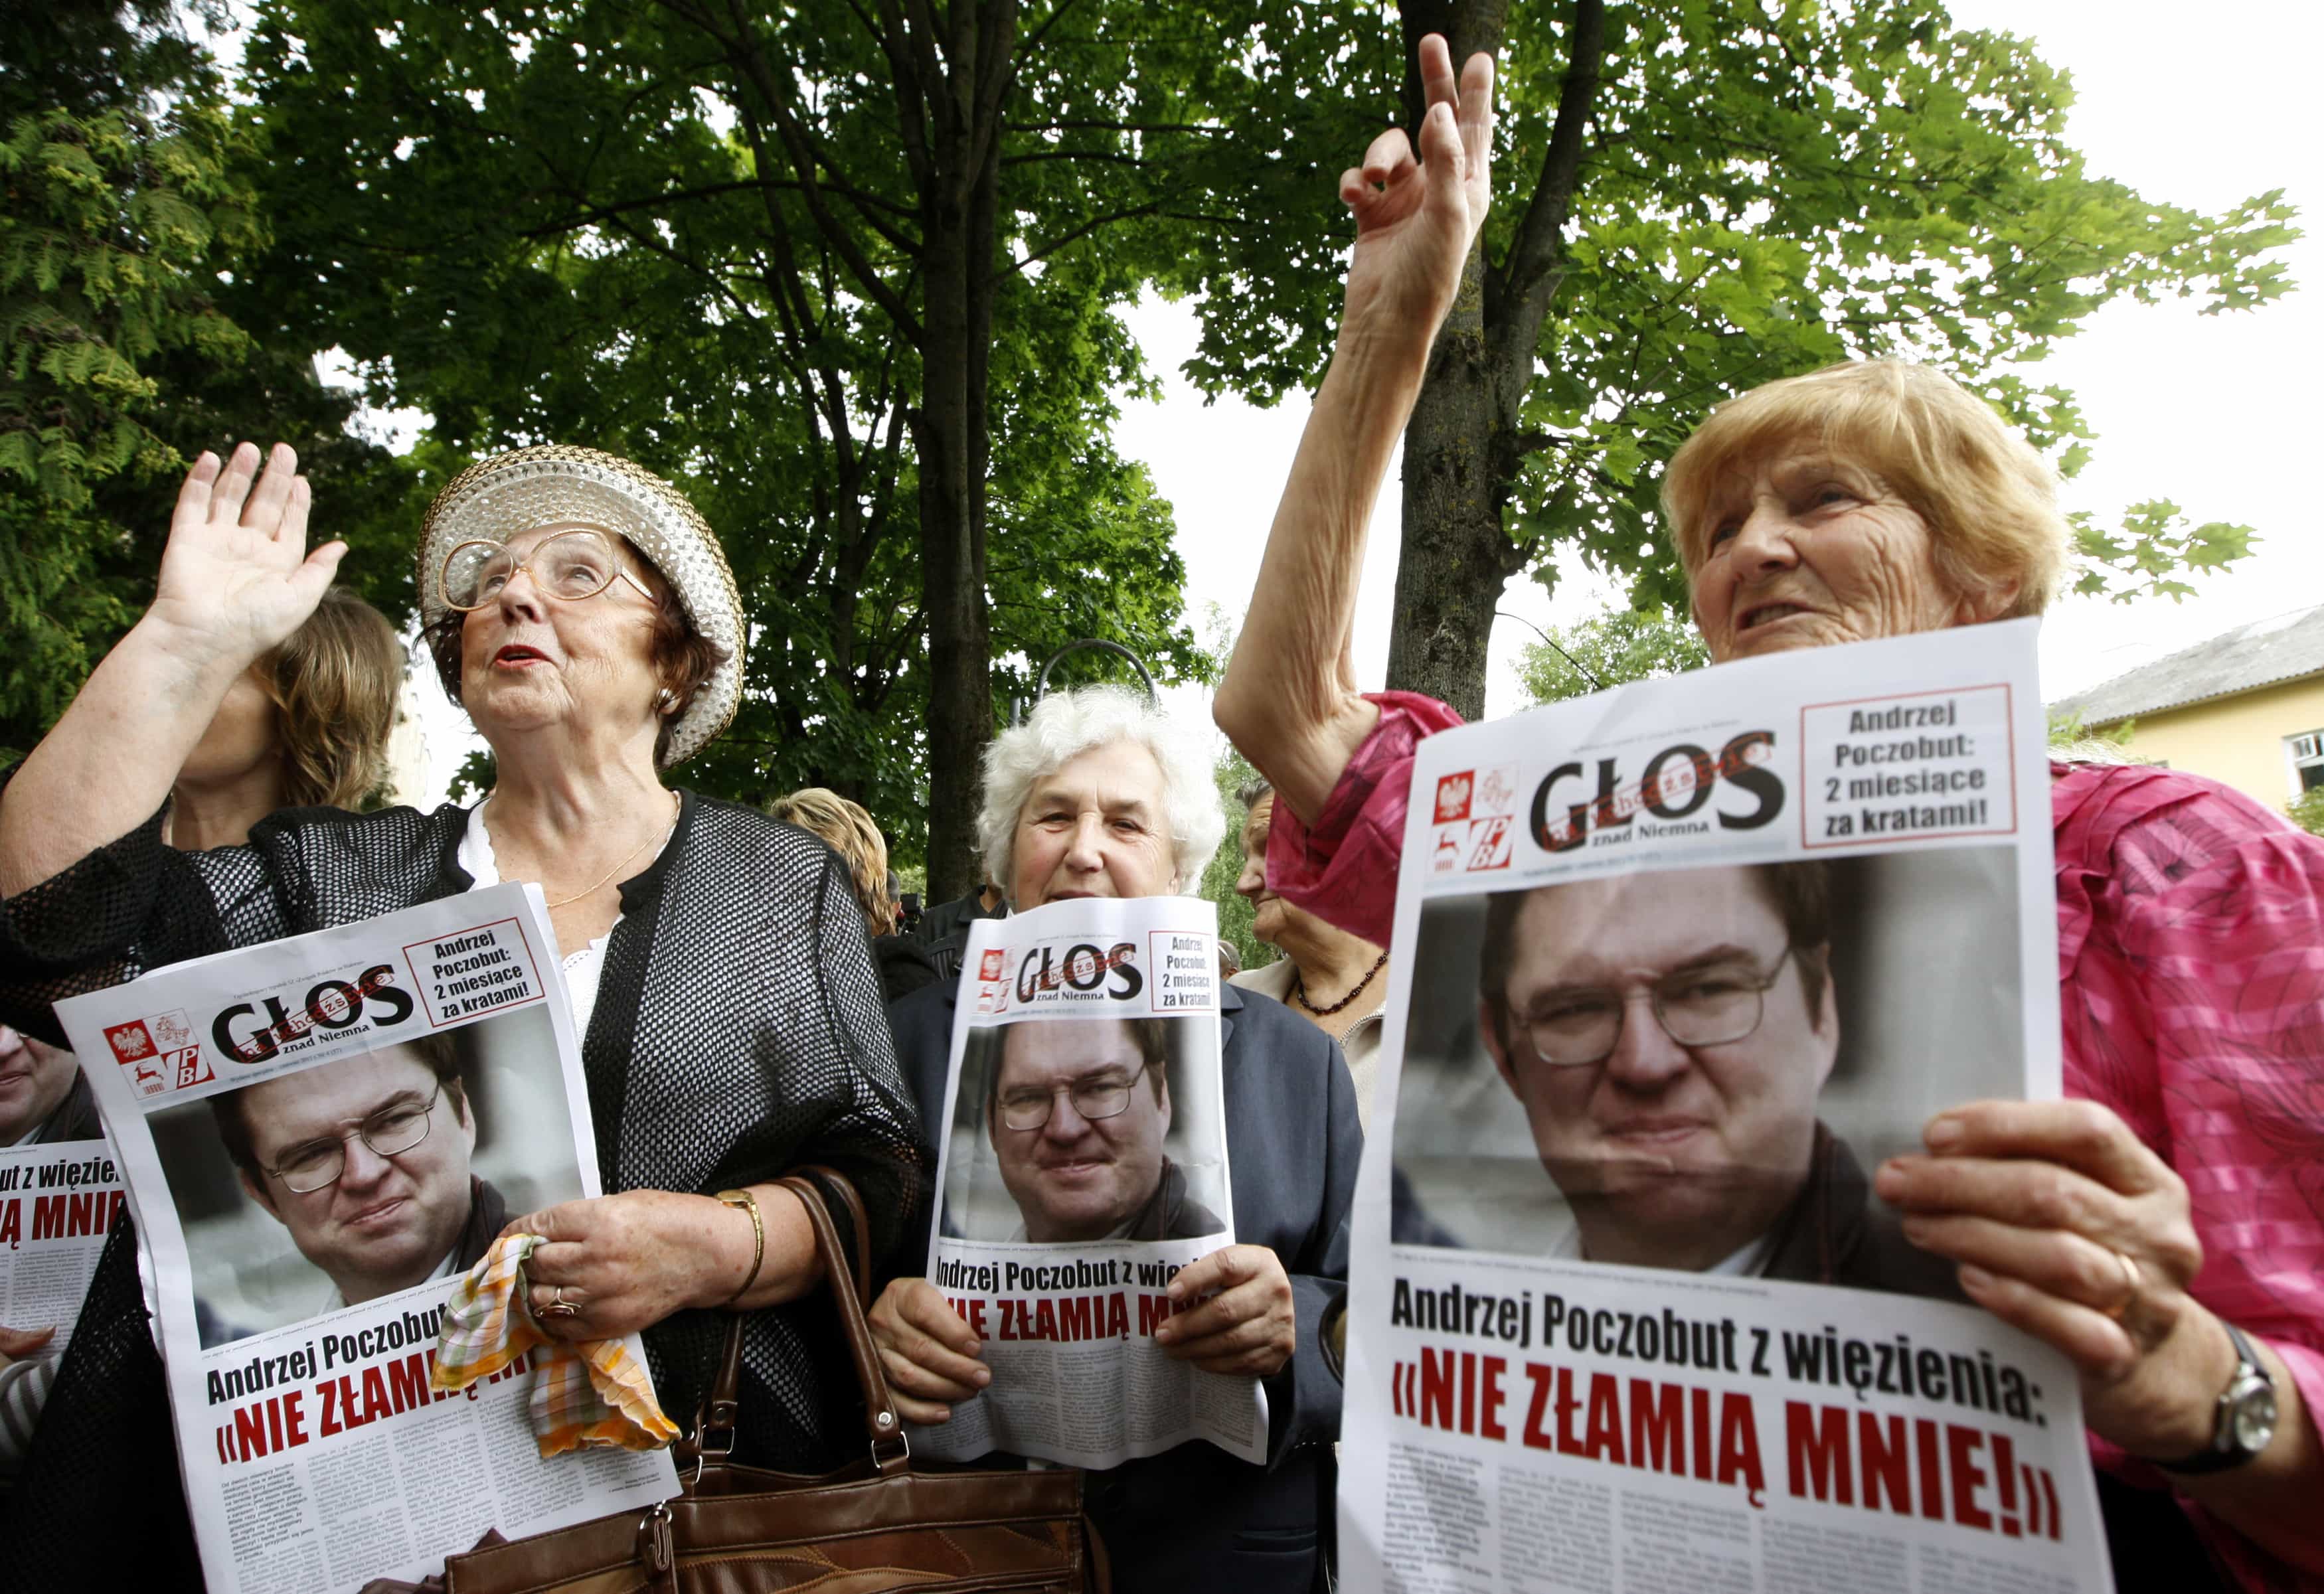 Supporters of Andrzej Poczobut hold copies of a newspaper displaying his portrait on 5 July 2011, REUTERS/Vasily Fedosenko